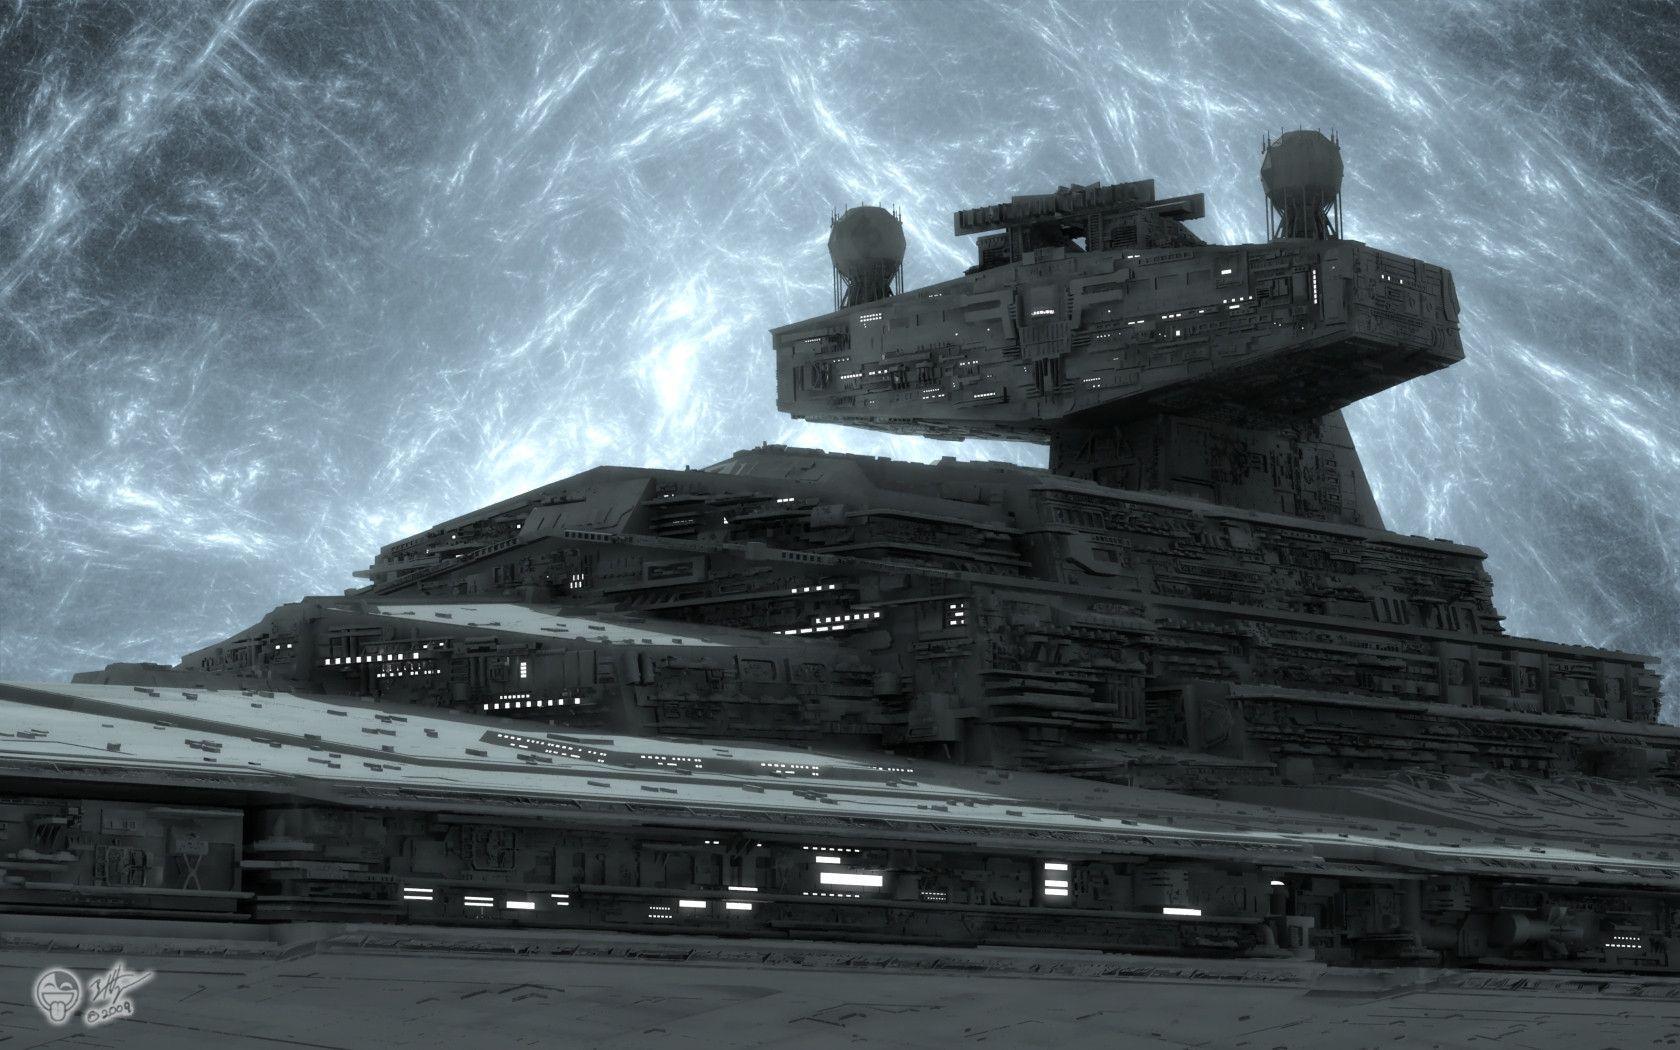 × 1050 Star Destroyer Wallpaper. So, this is what I&;m thinking